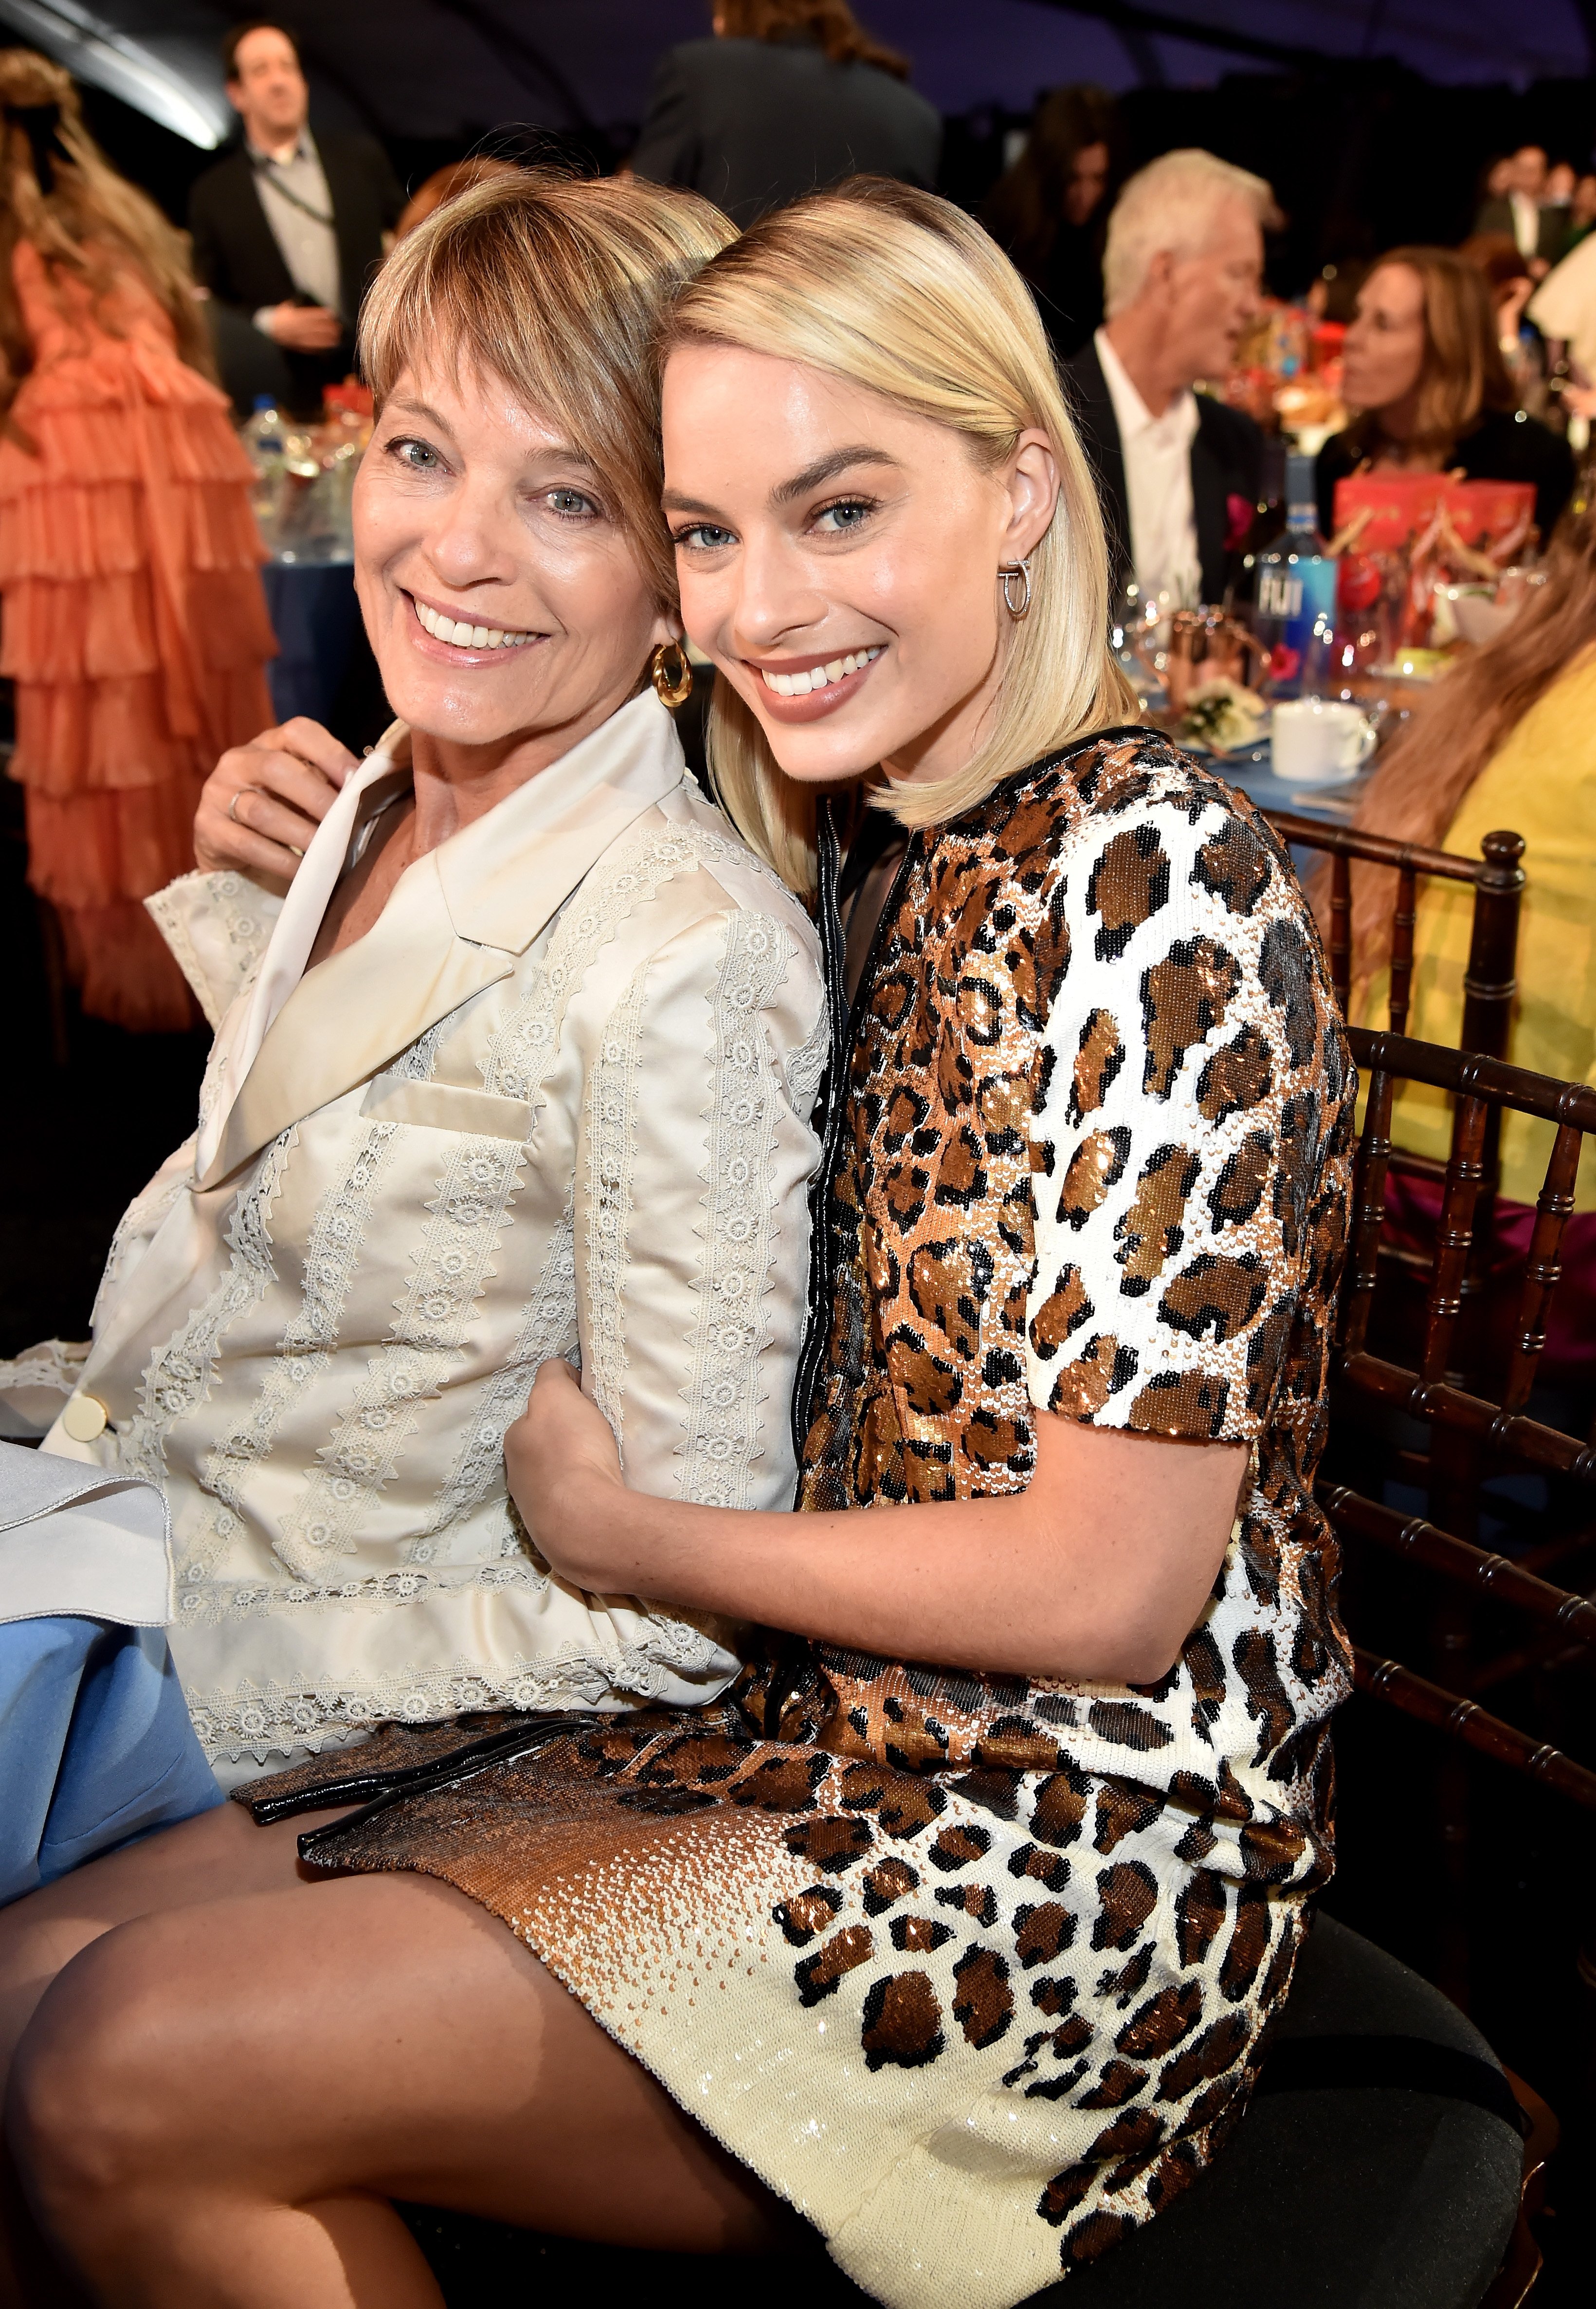 Sarie Kessler (L) and Margot Robbie pose during the 2018 Film Independent Spirit Awards on March 3, 2018, in Santa Monica, California. | Source: Kevin Mazur/Getty Images